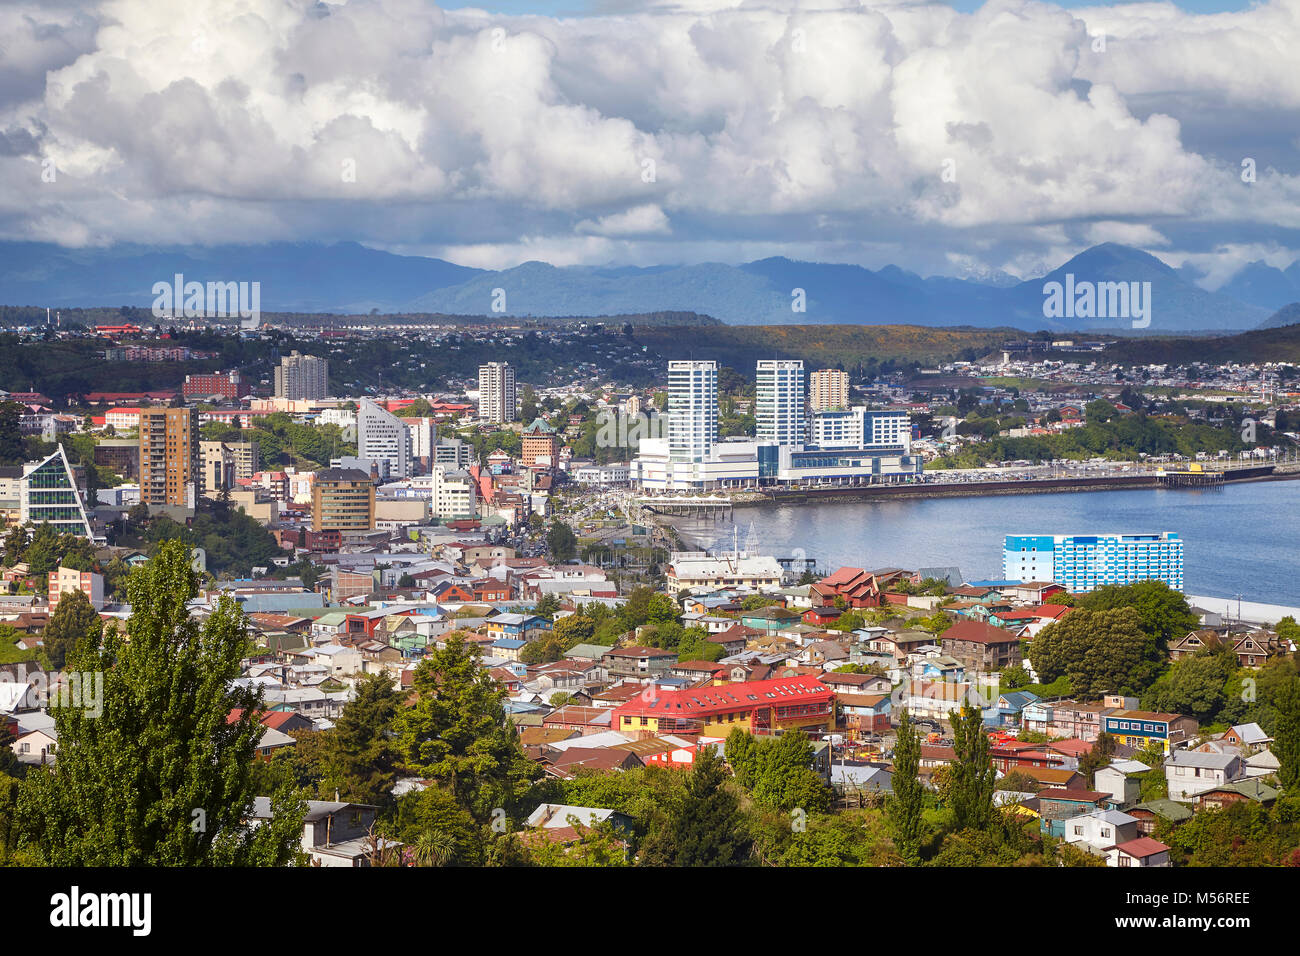 General view of the Puerto Montt port city, Chile. Stock Photo